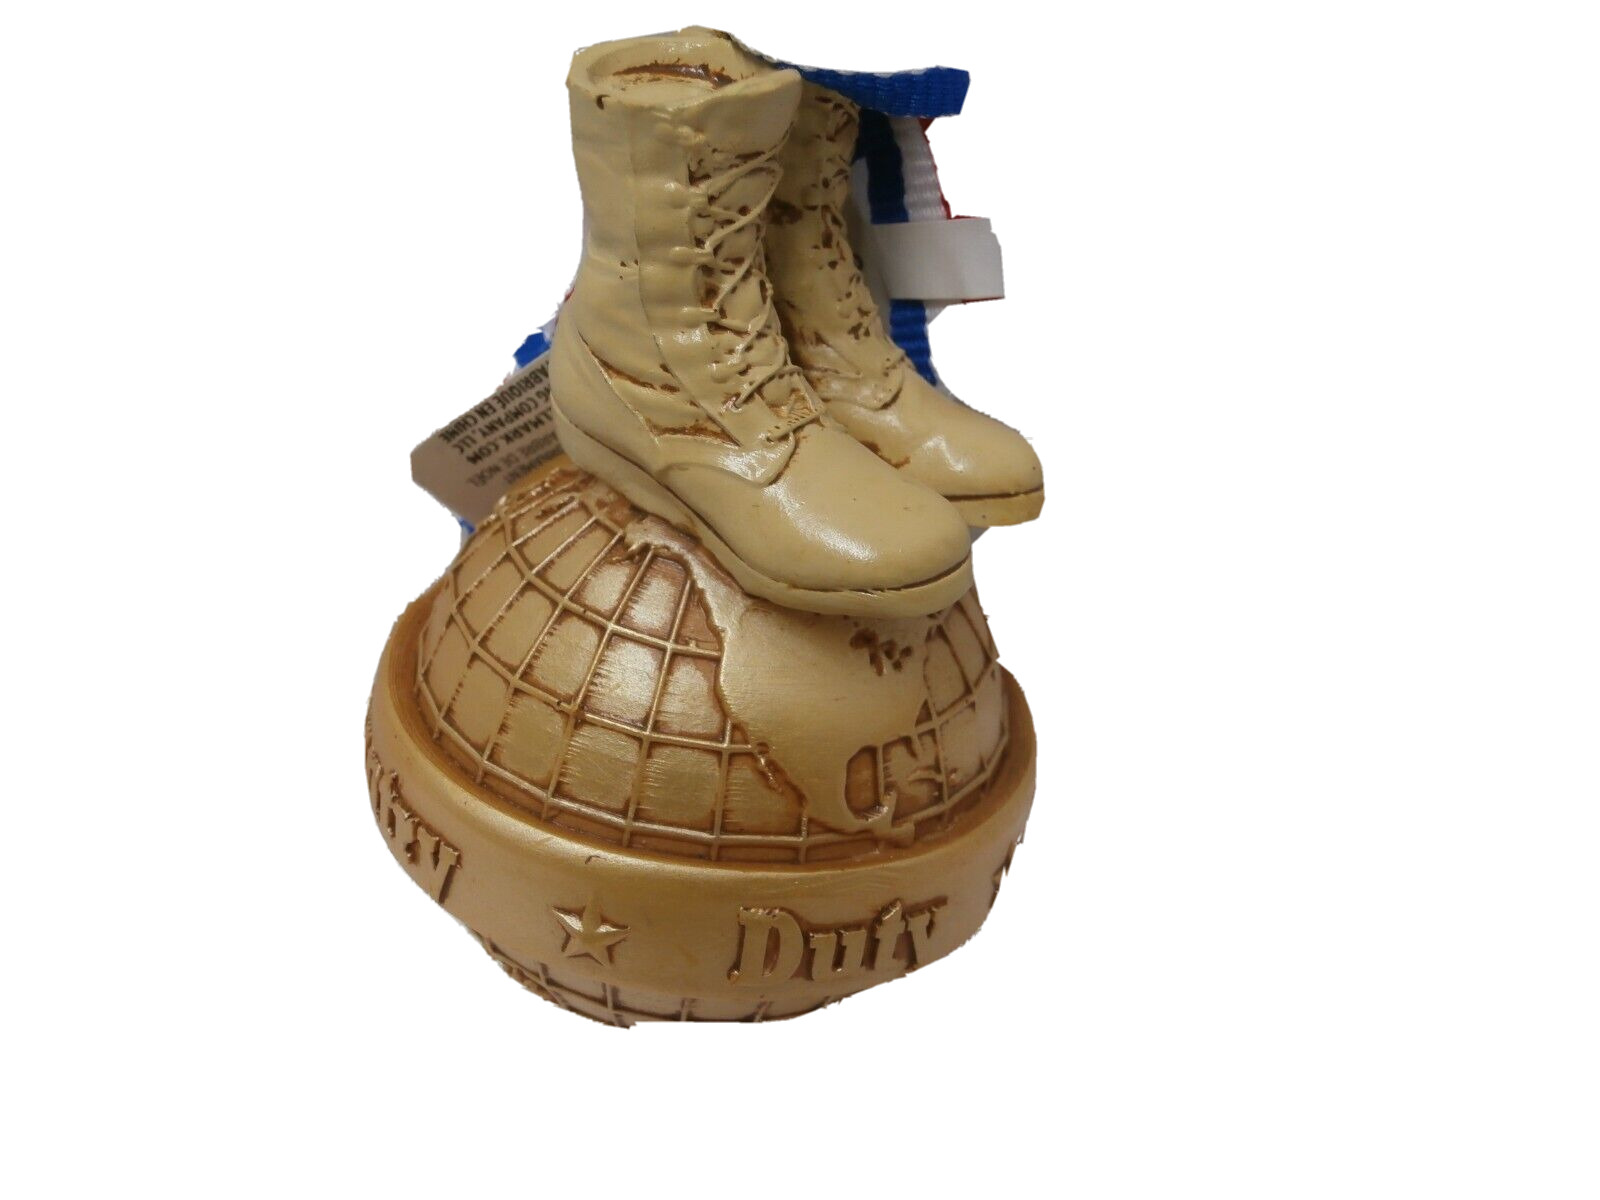 Hallmark Ornament Military Boots on Globe Duty Honor Service Country New - s5a